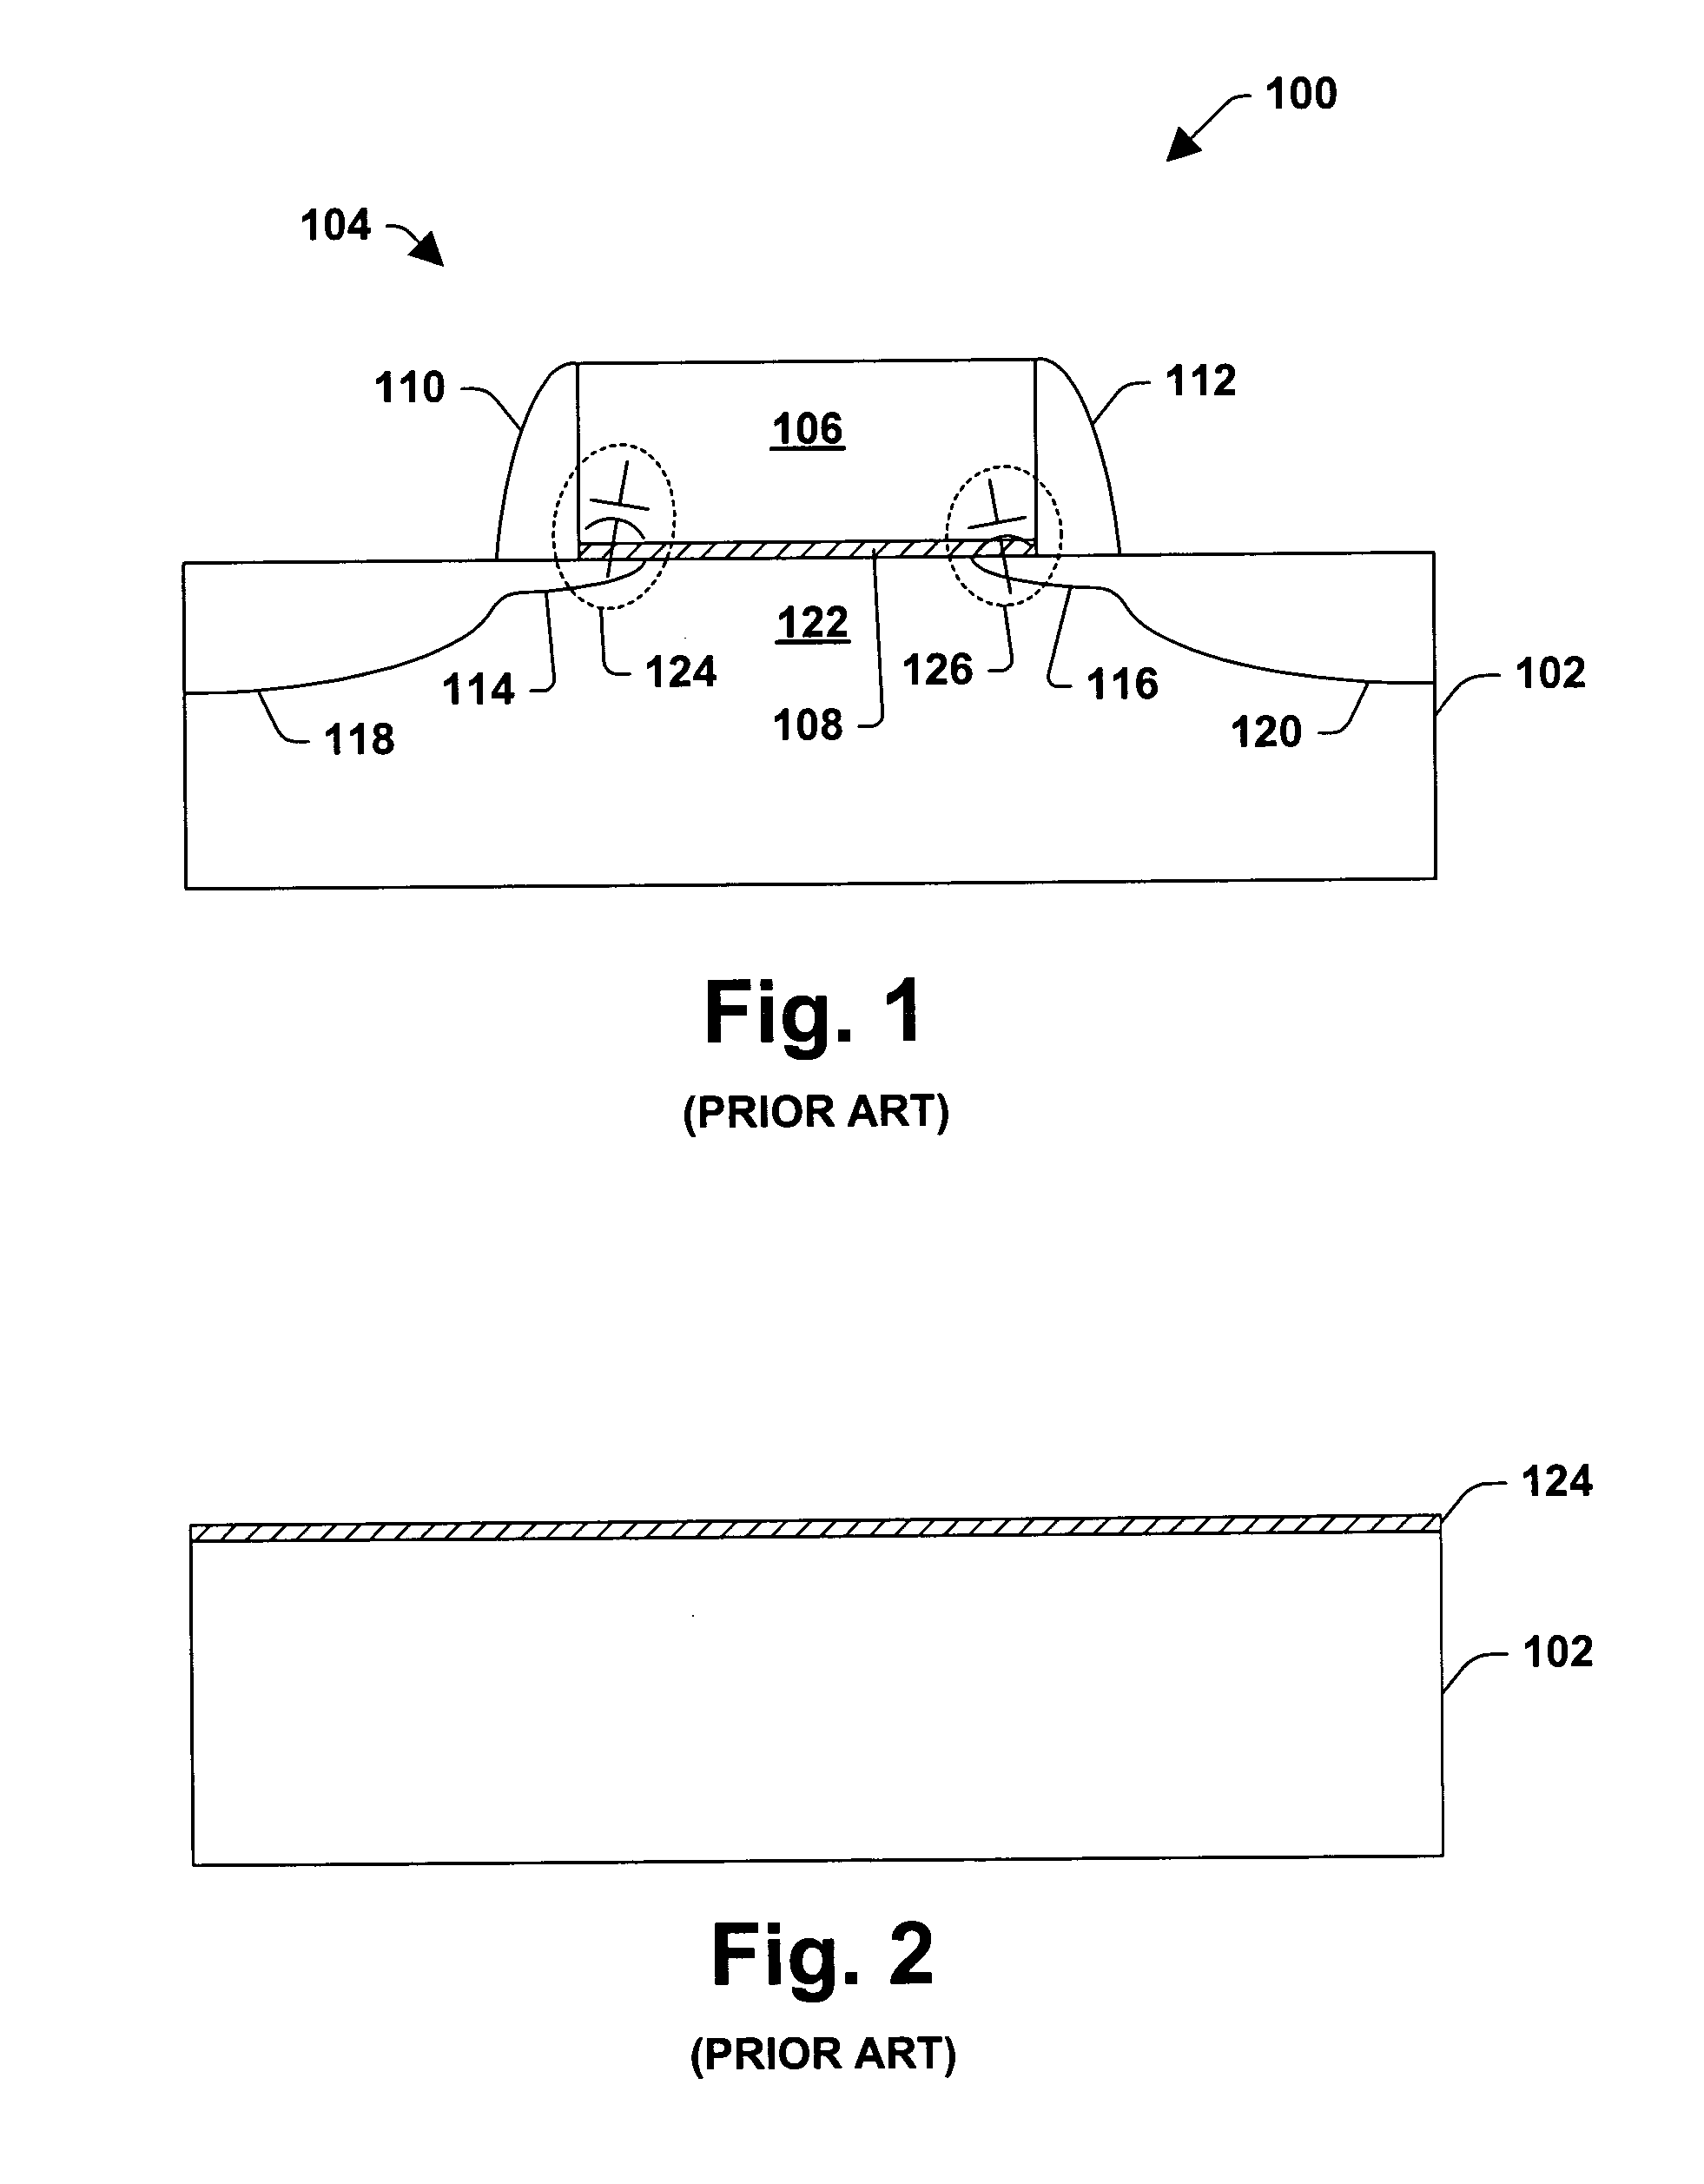 Method to reduce transistor gate to source/drain overlap capacitance by incorporaton of carbon